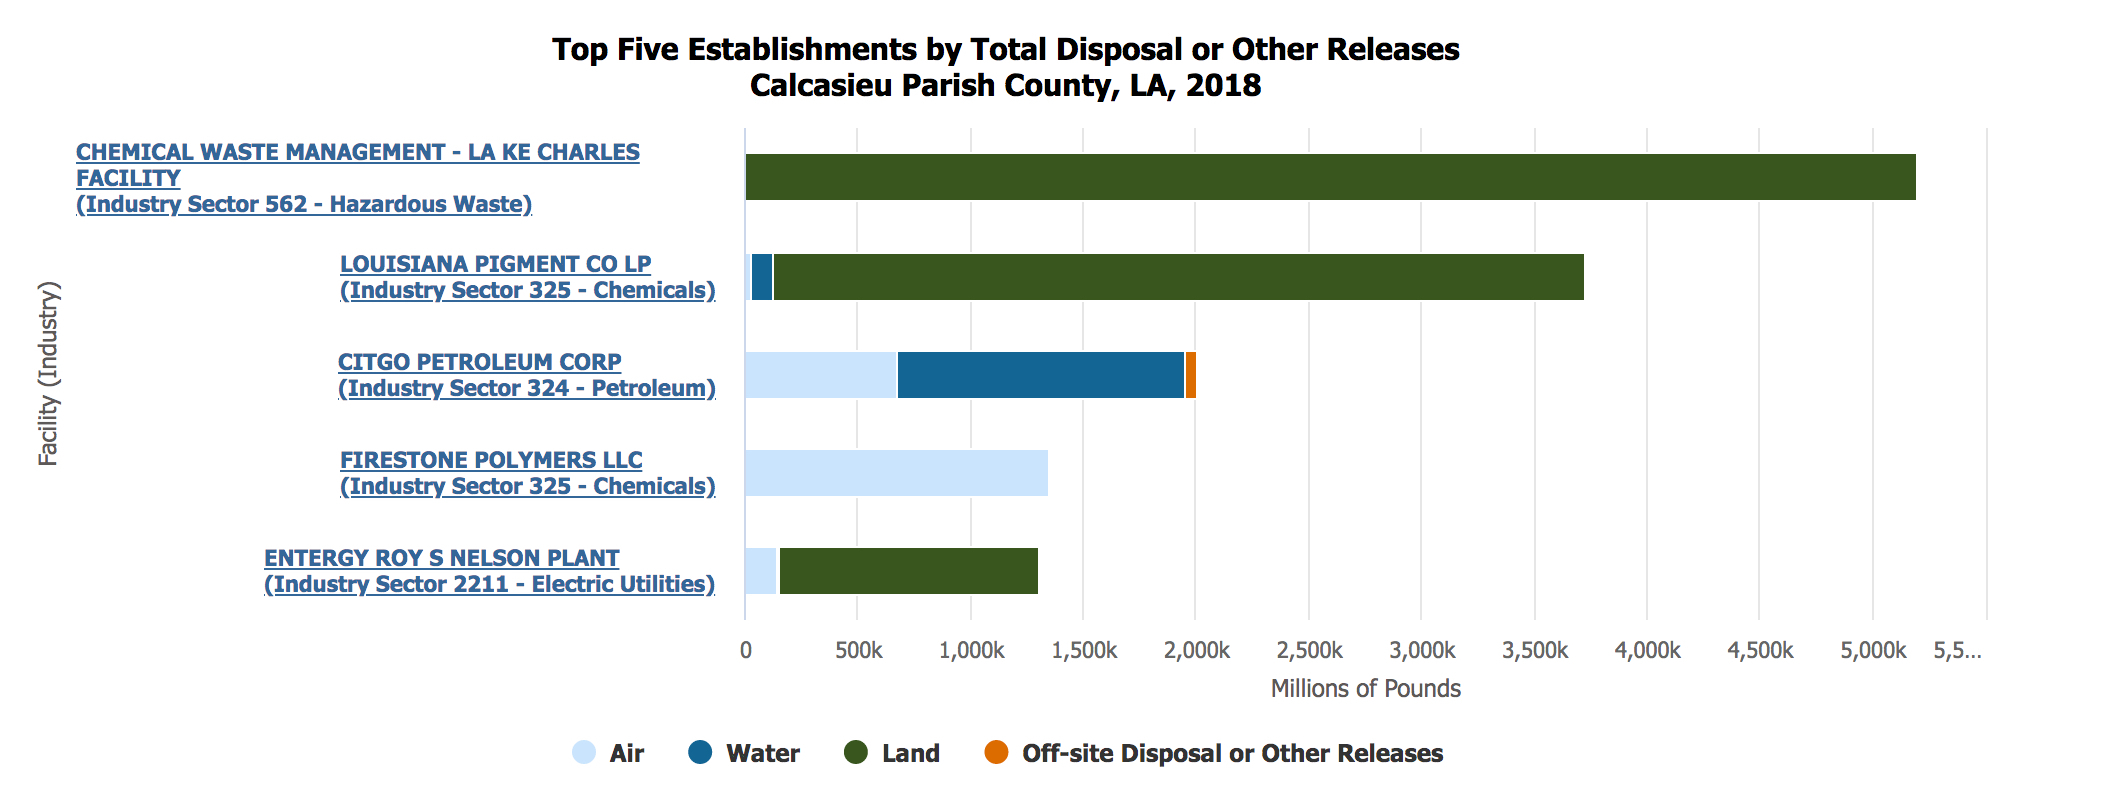 These are the facilities that reported the largest releases to EPA's Toxic Release Inventory(TRI). You can explore TRI data in your community here: https://www.epa.gov/trinationalanalysis/where-you-live